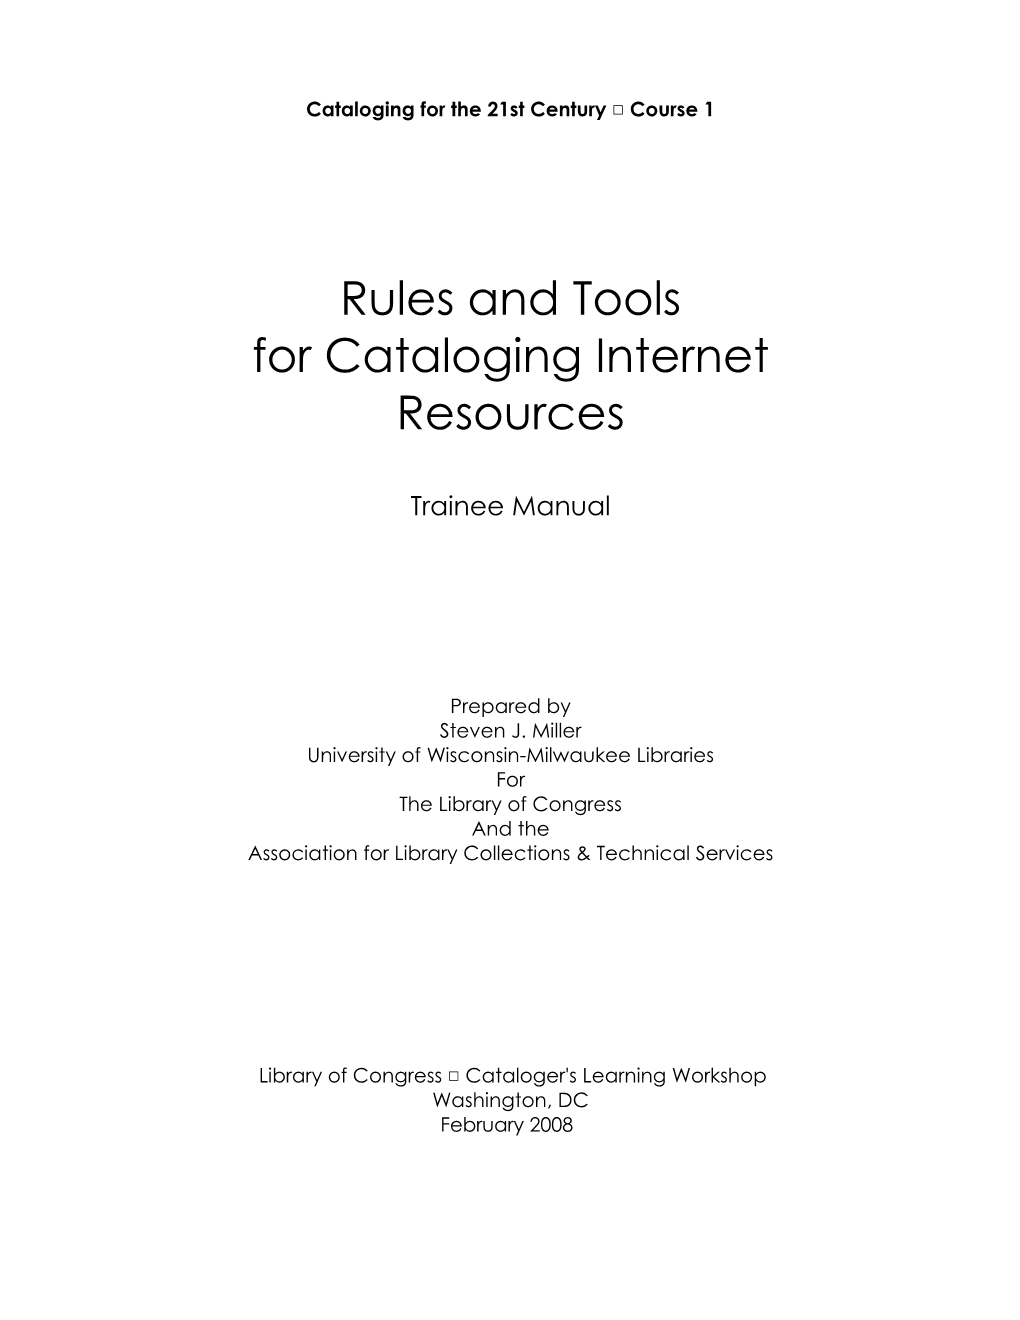 Rules and Tools for Cataloging Internet Resources